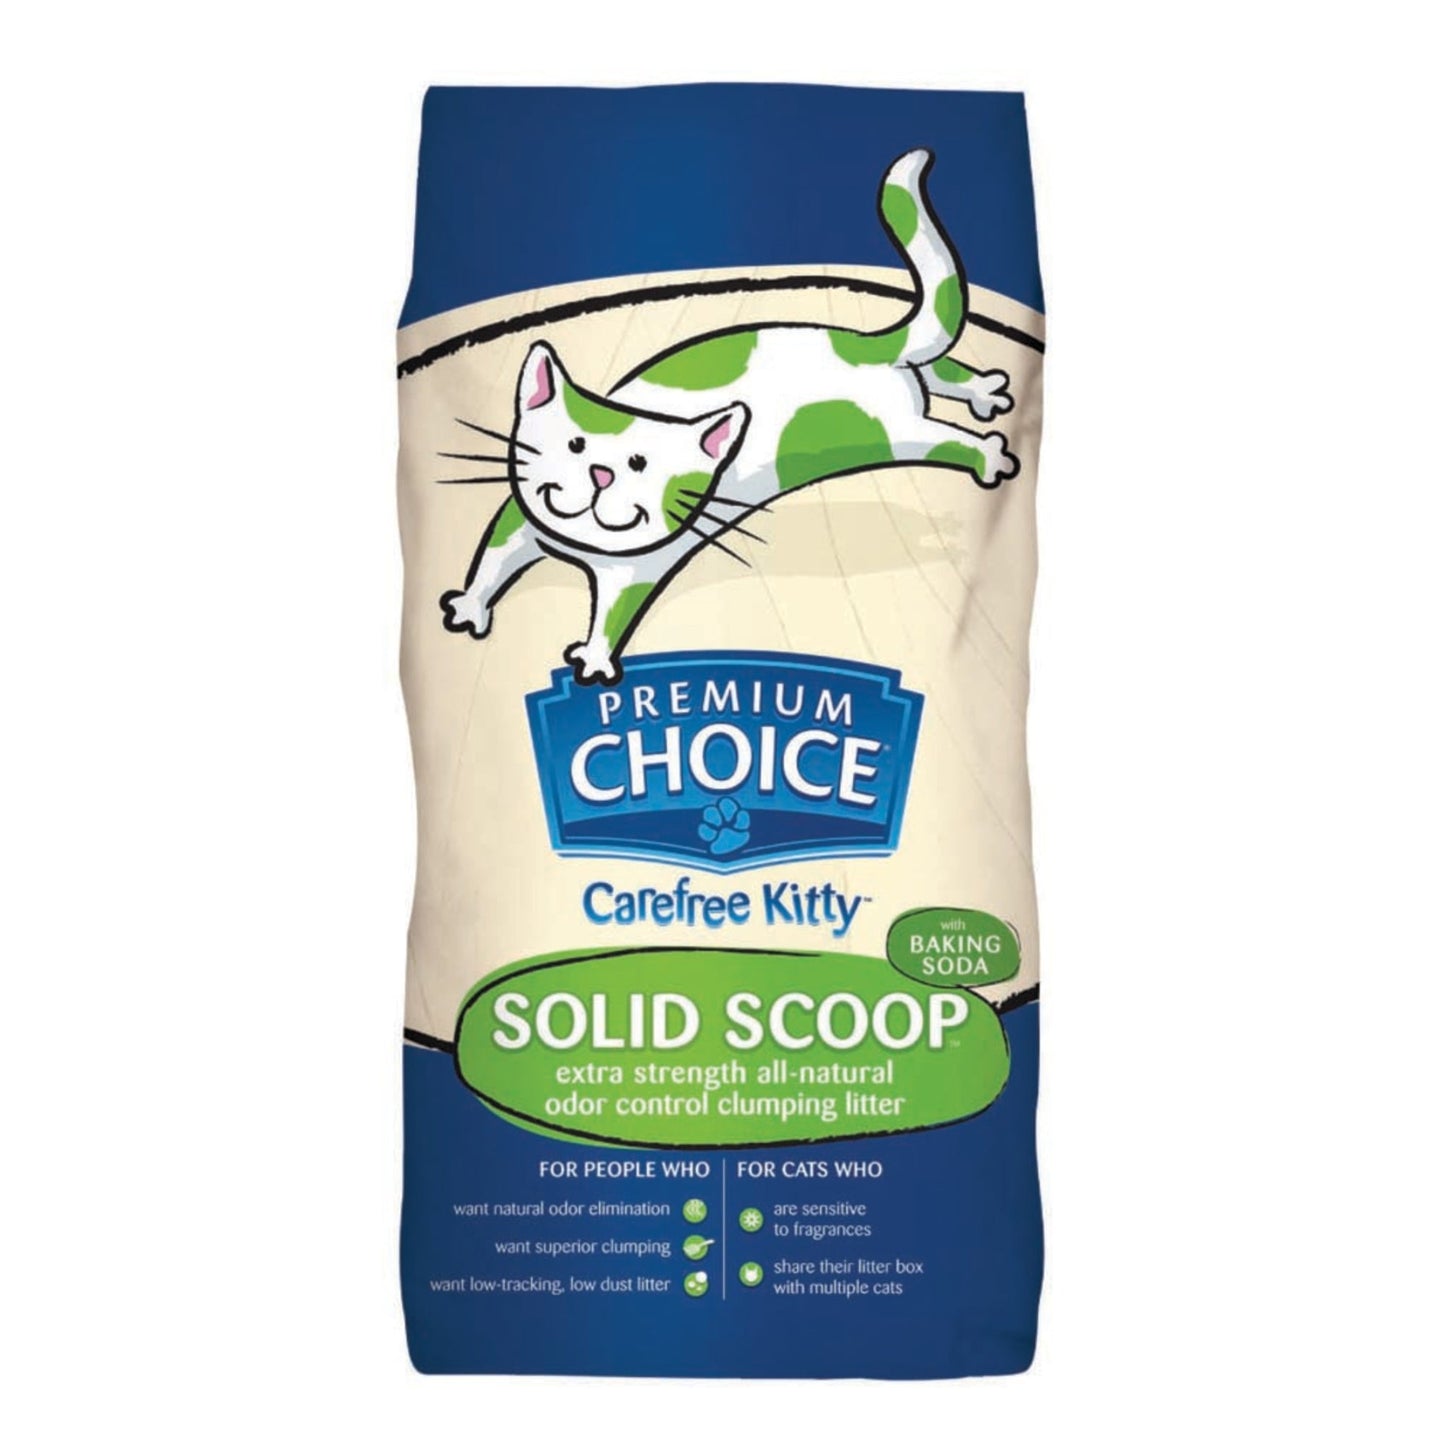 Premium Choice Litter Carefree Kitty Unscented with Baking Soda Scoop Cat Litter 1ea/25 lb